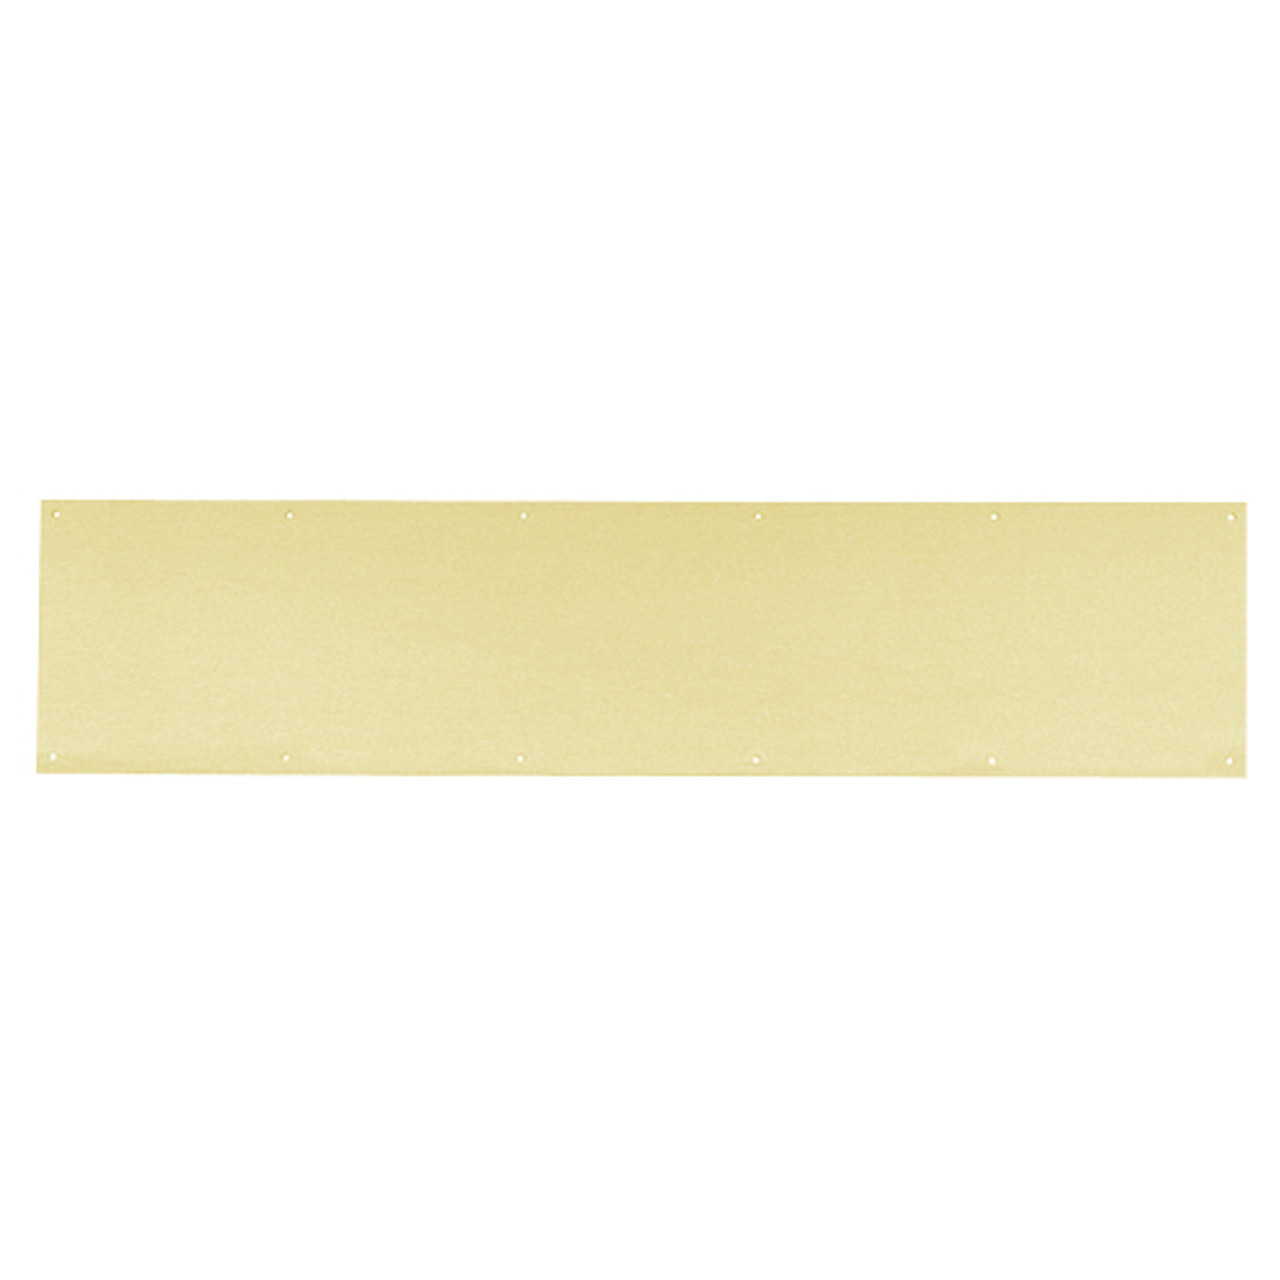 8400-US4-10x46-B-CS Ives 8400 Series Protection Plate in Satin Brass